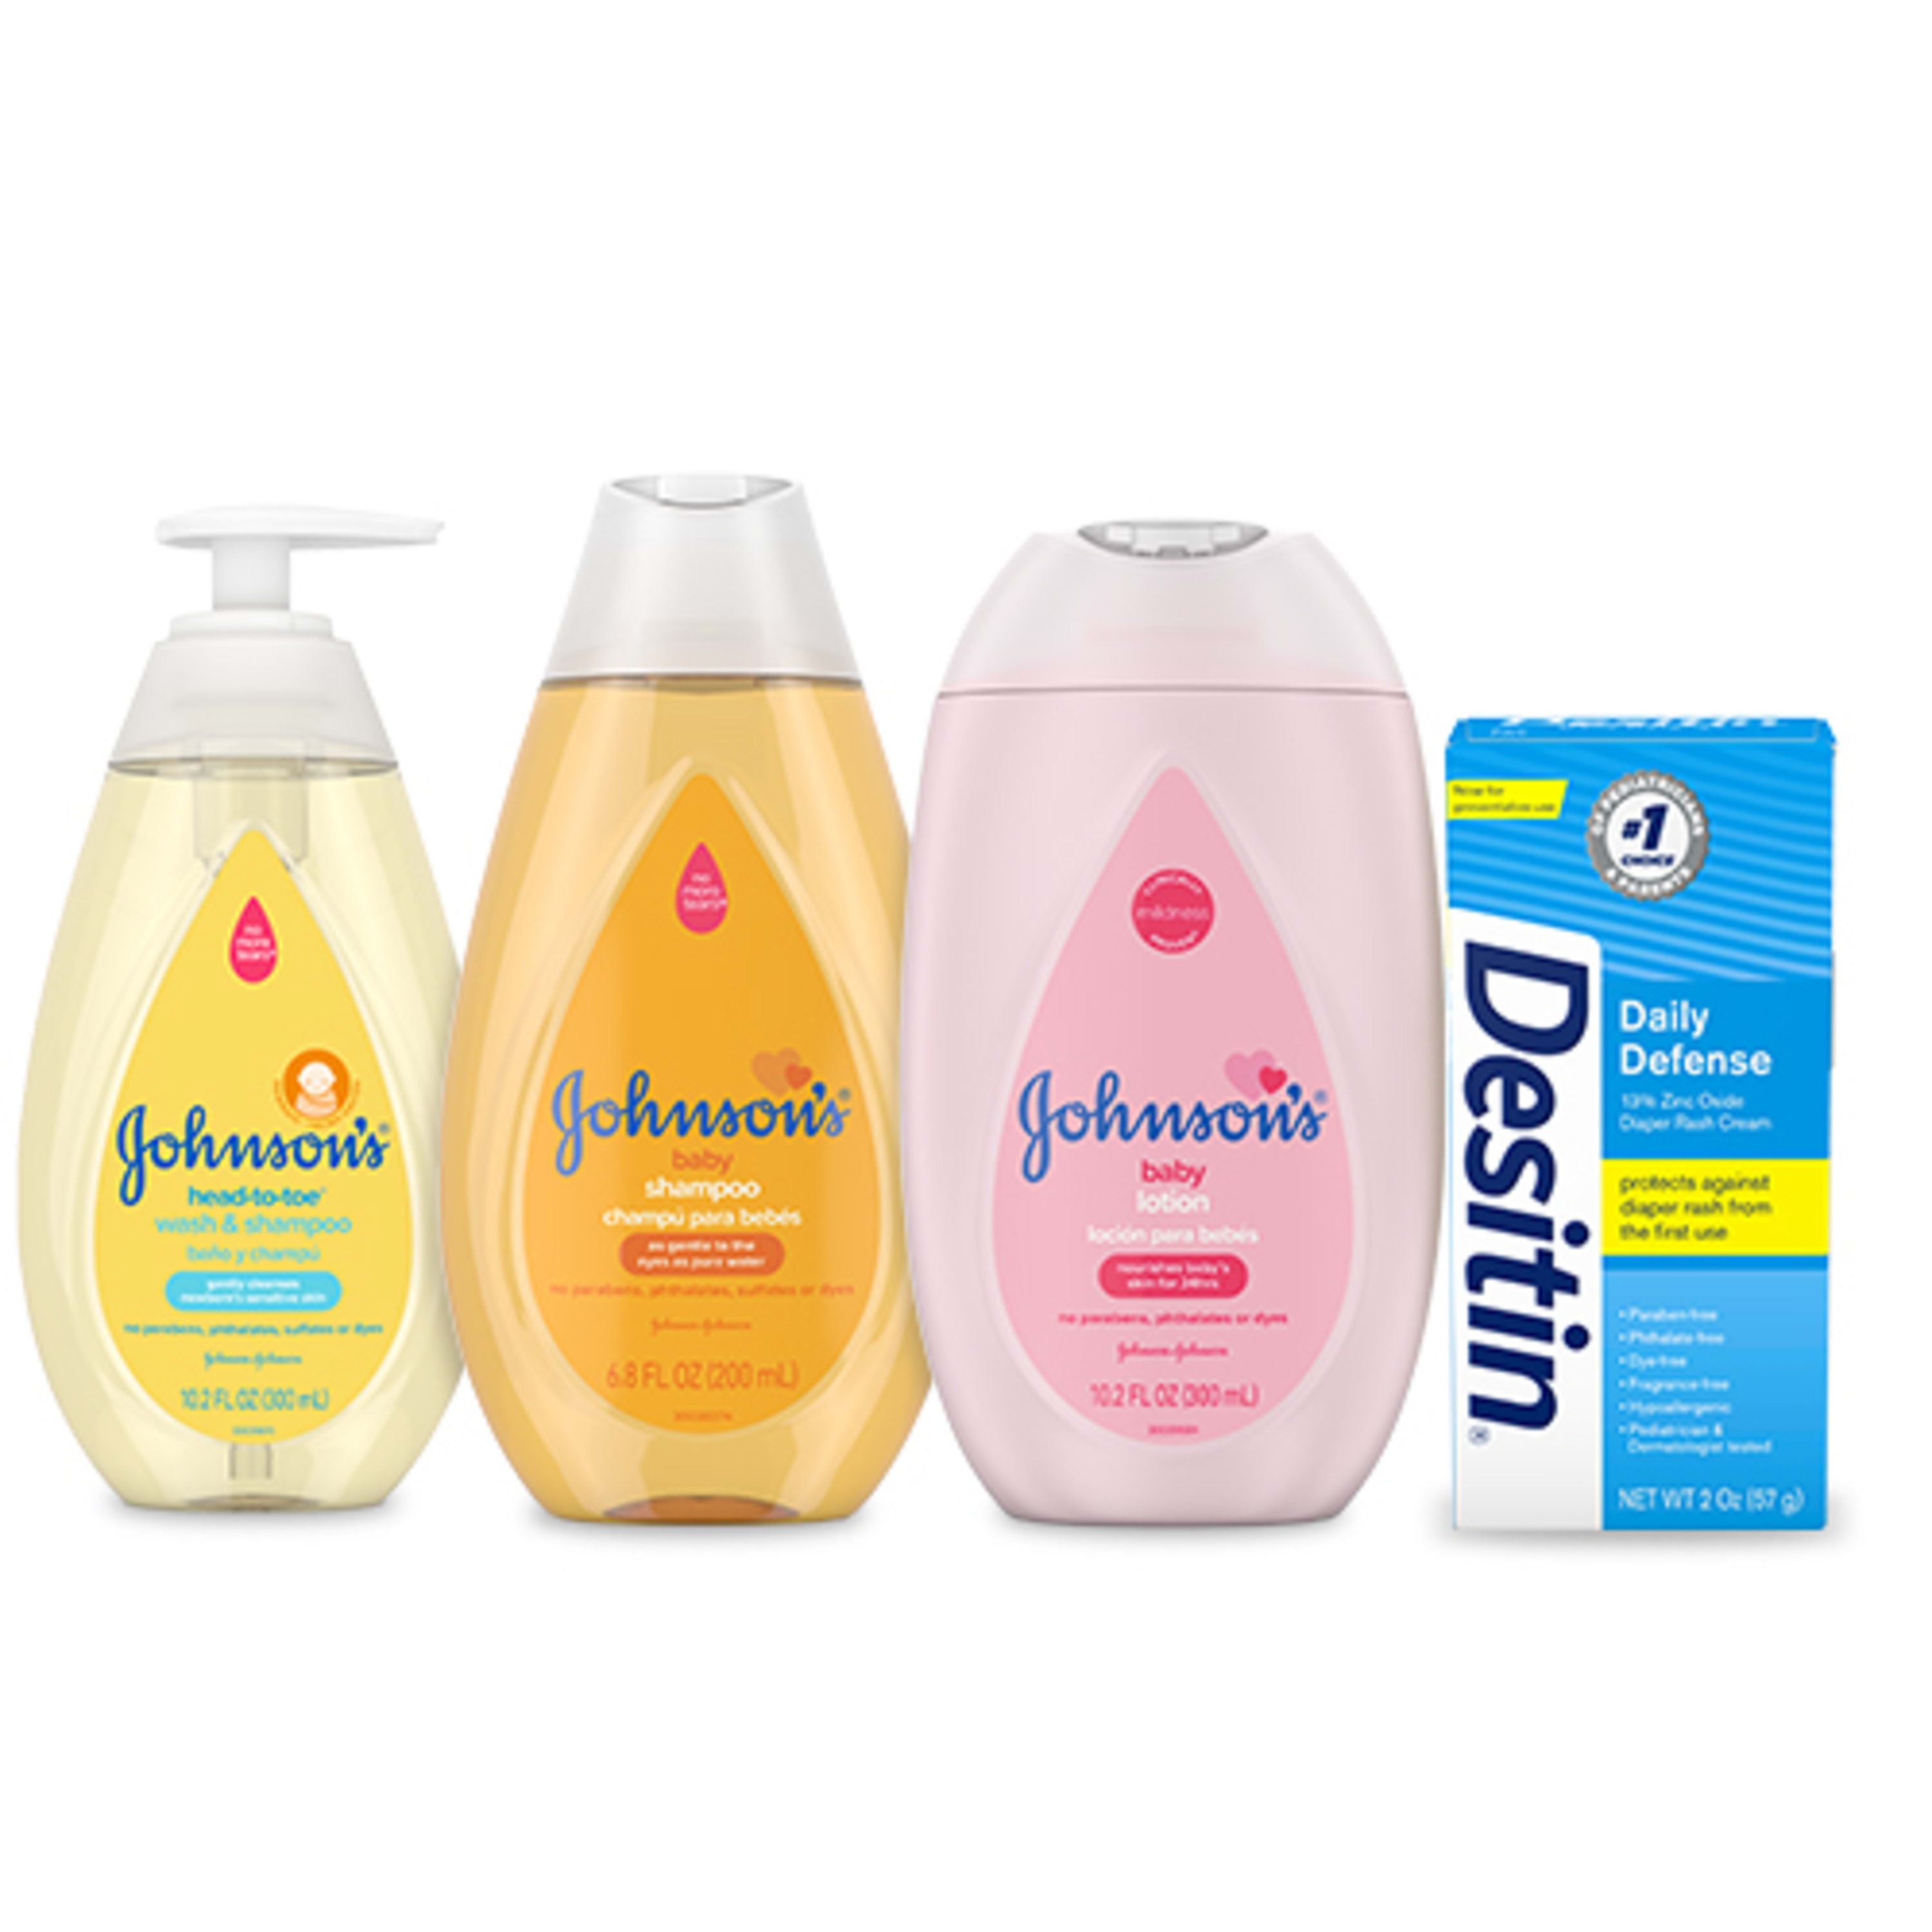 Johnson's First Touch Gift Set, Baby Bath & Skin Products, 5 items - image 3 of 18